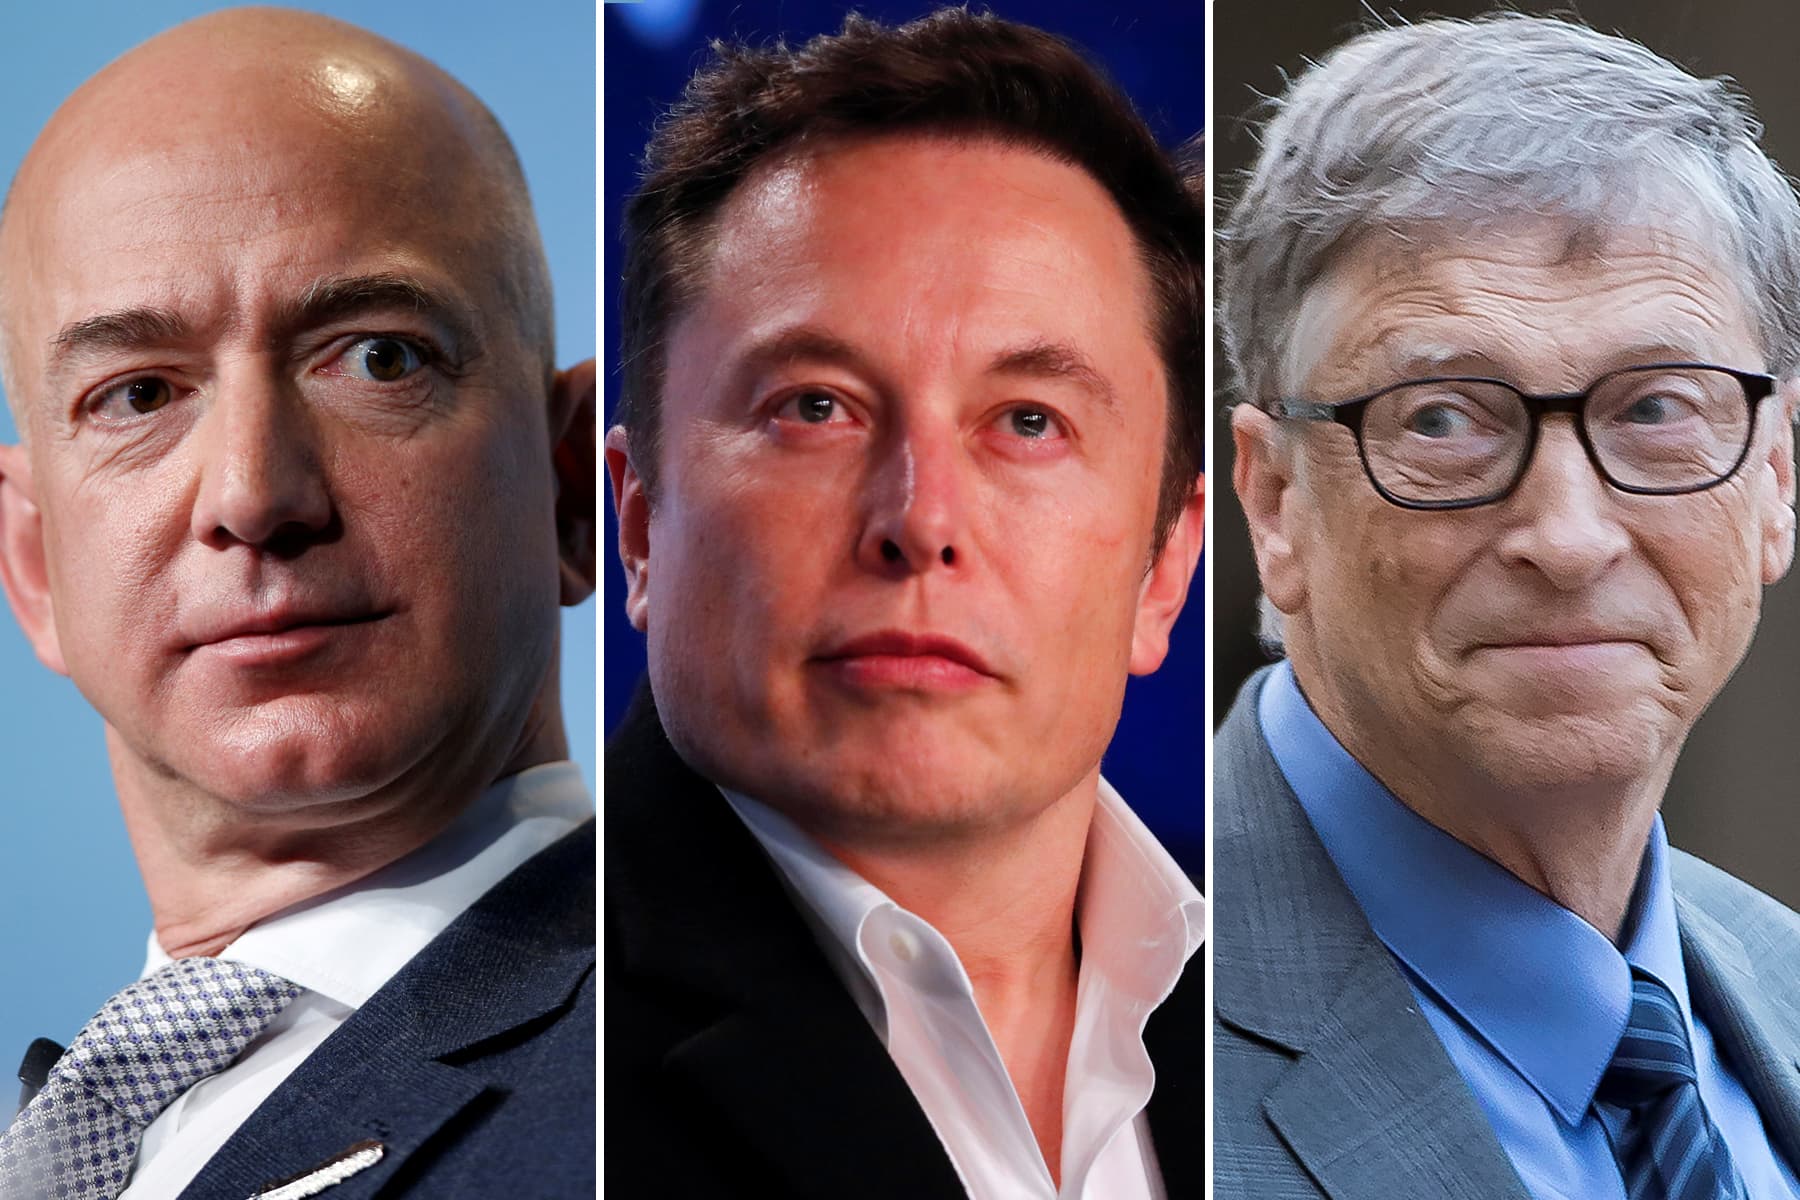 Bill Gates, Jeff Bezos and Elon Musk fight the climate problem in Iron Man mode